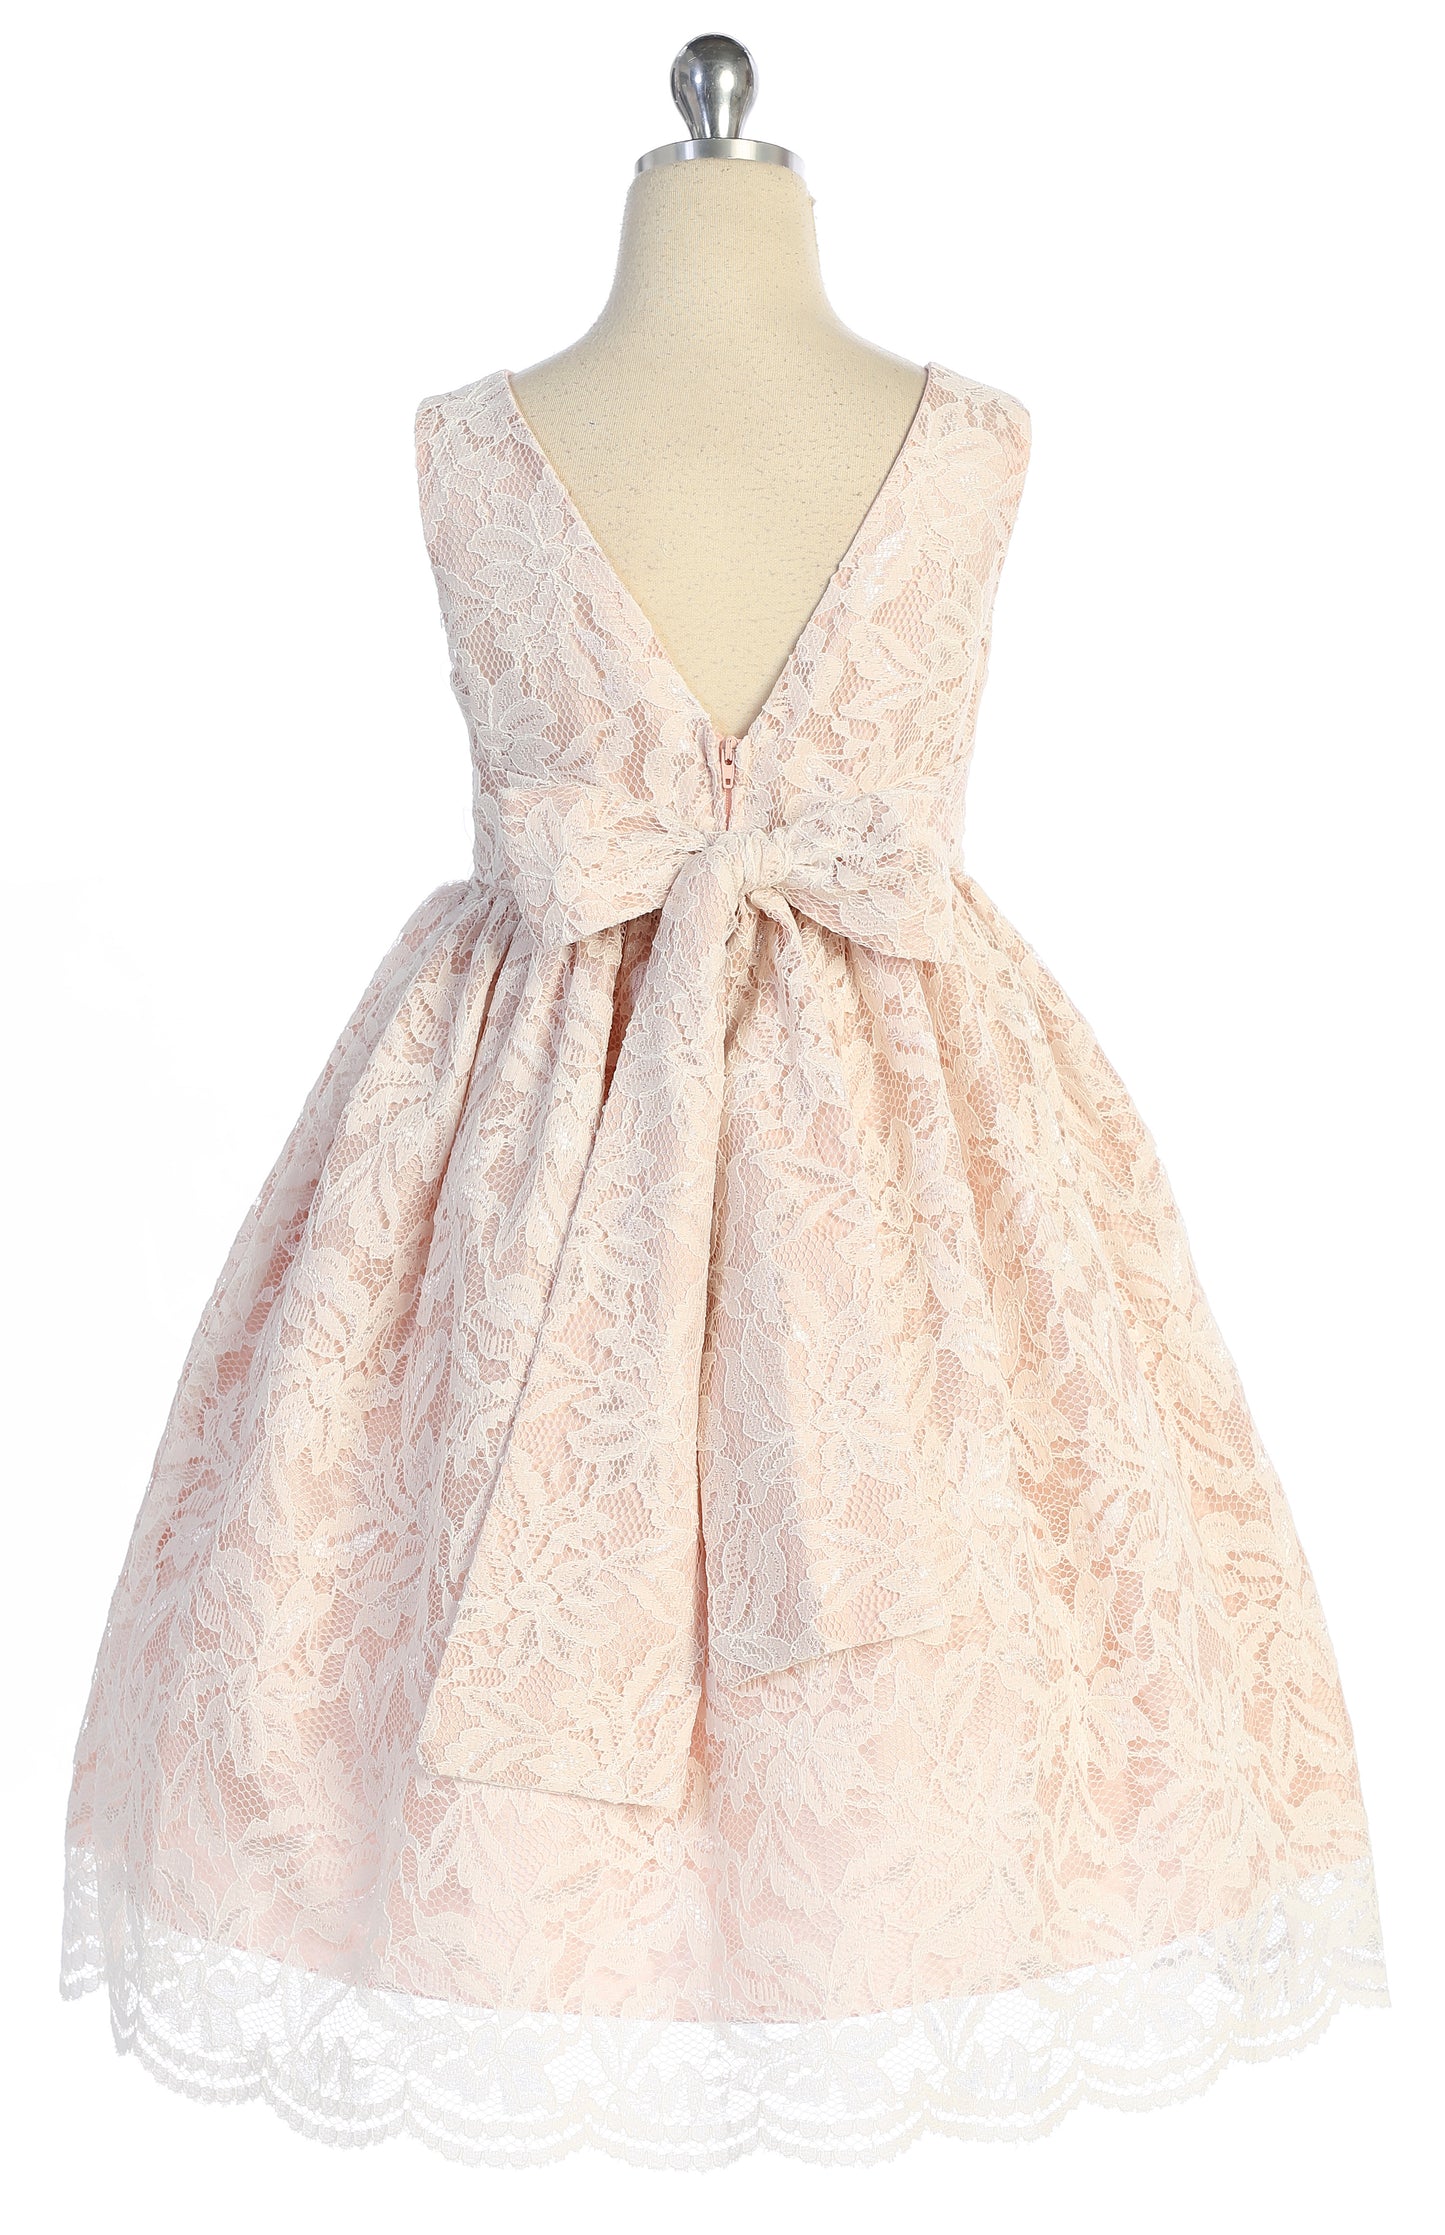 All Lace Girls Dress with V Back & Bow and Thick Rhinestone Trim